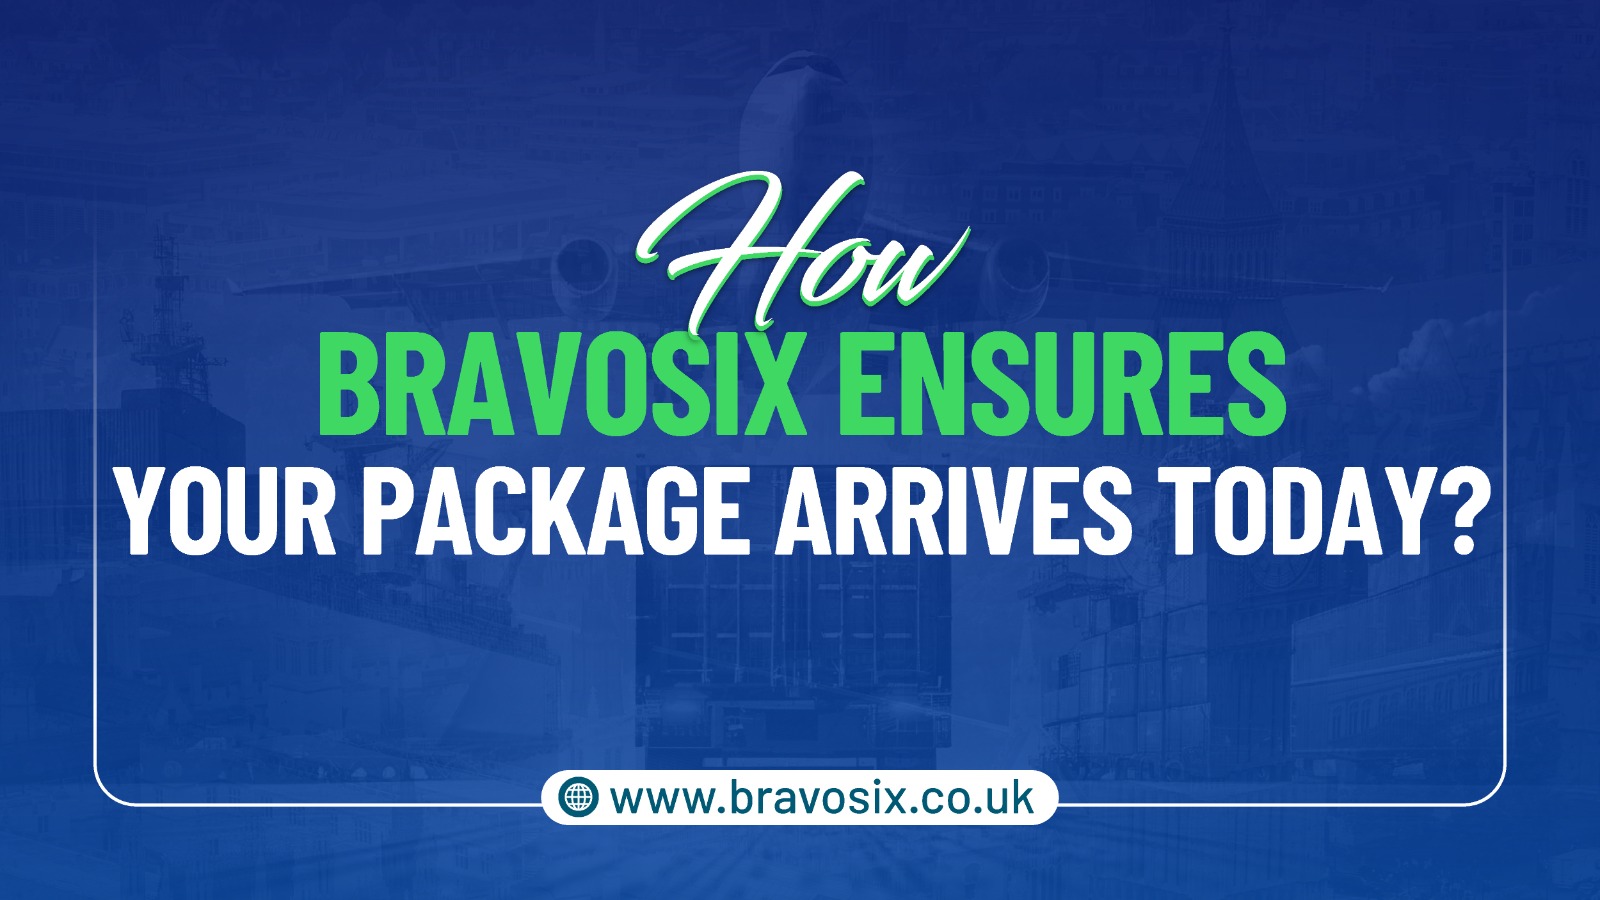 How Bravosix Ensures Your Package Arrives Today